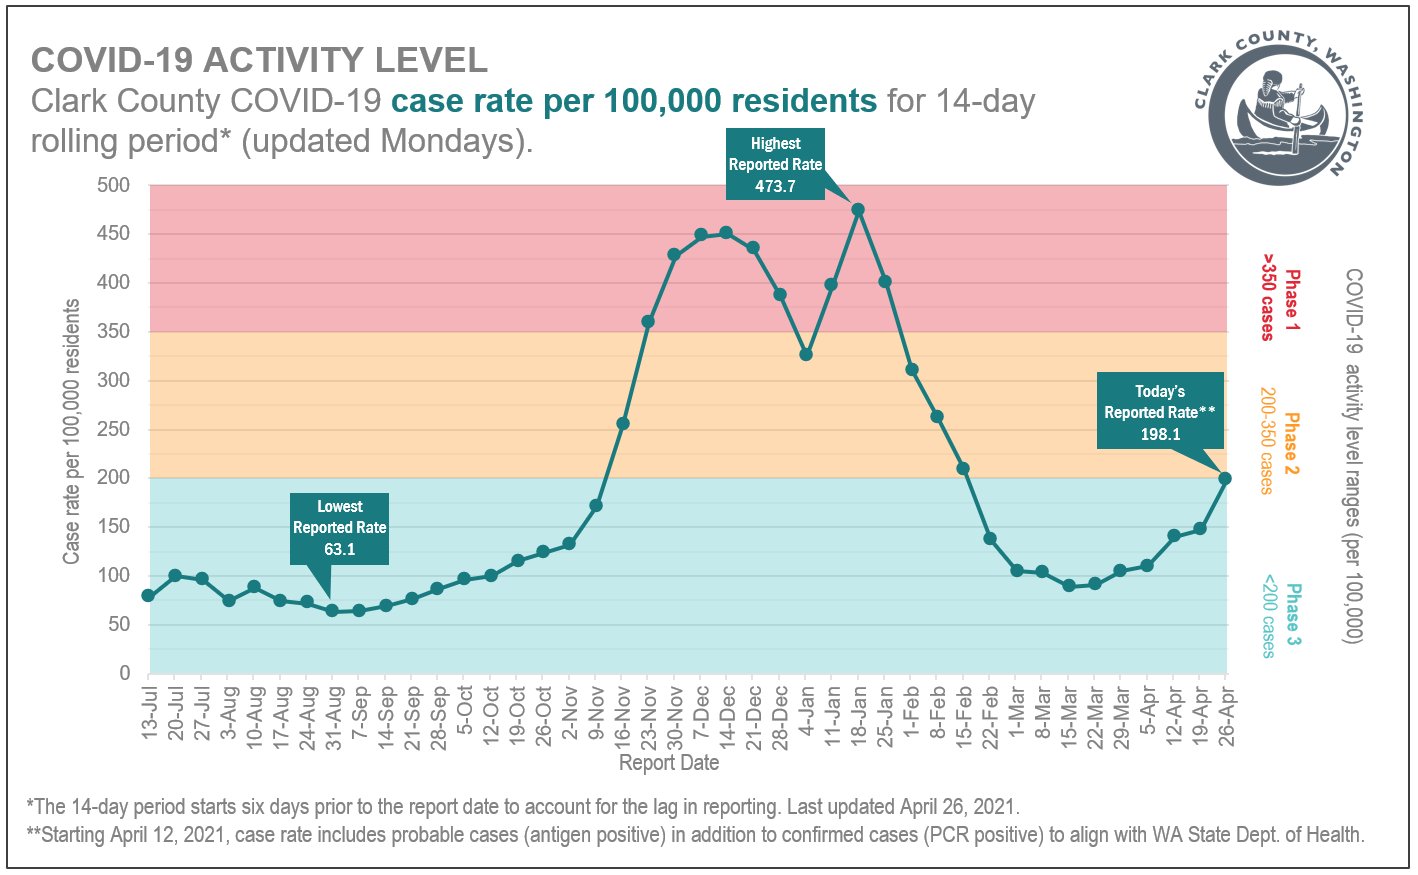 A graph showing the rate of COVID-19 cases per 100,000 of Clark County population in the past 14 days.